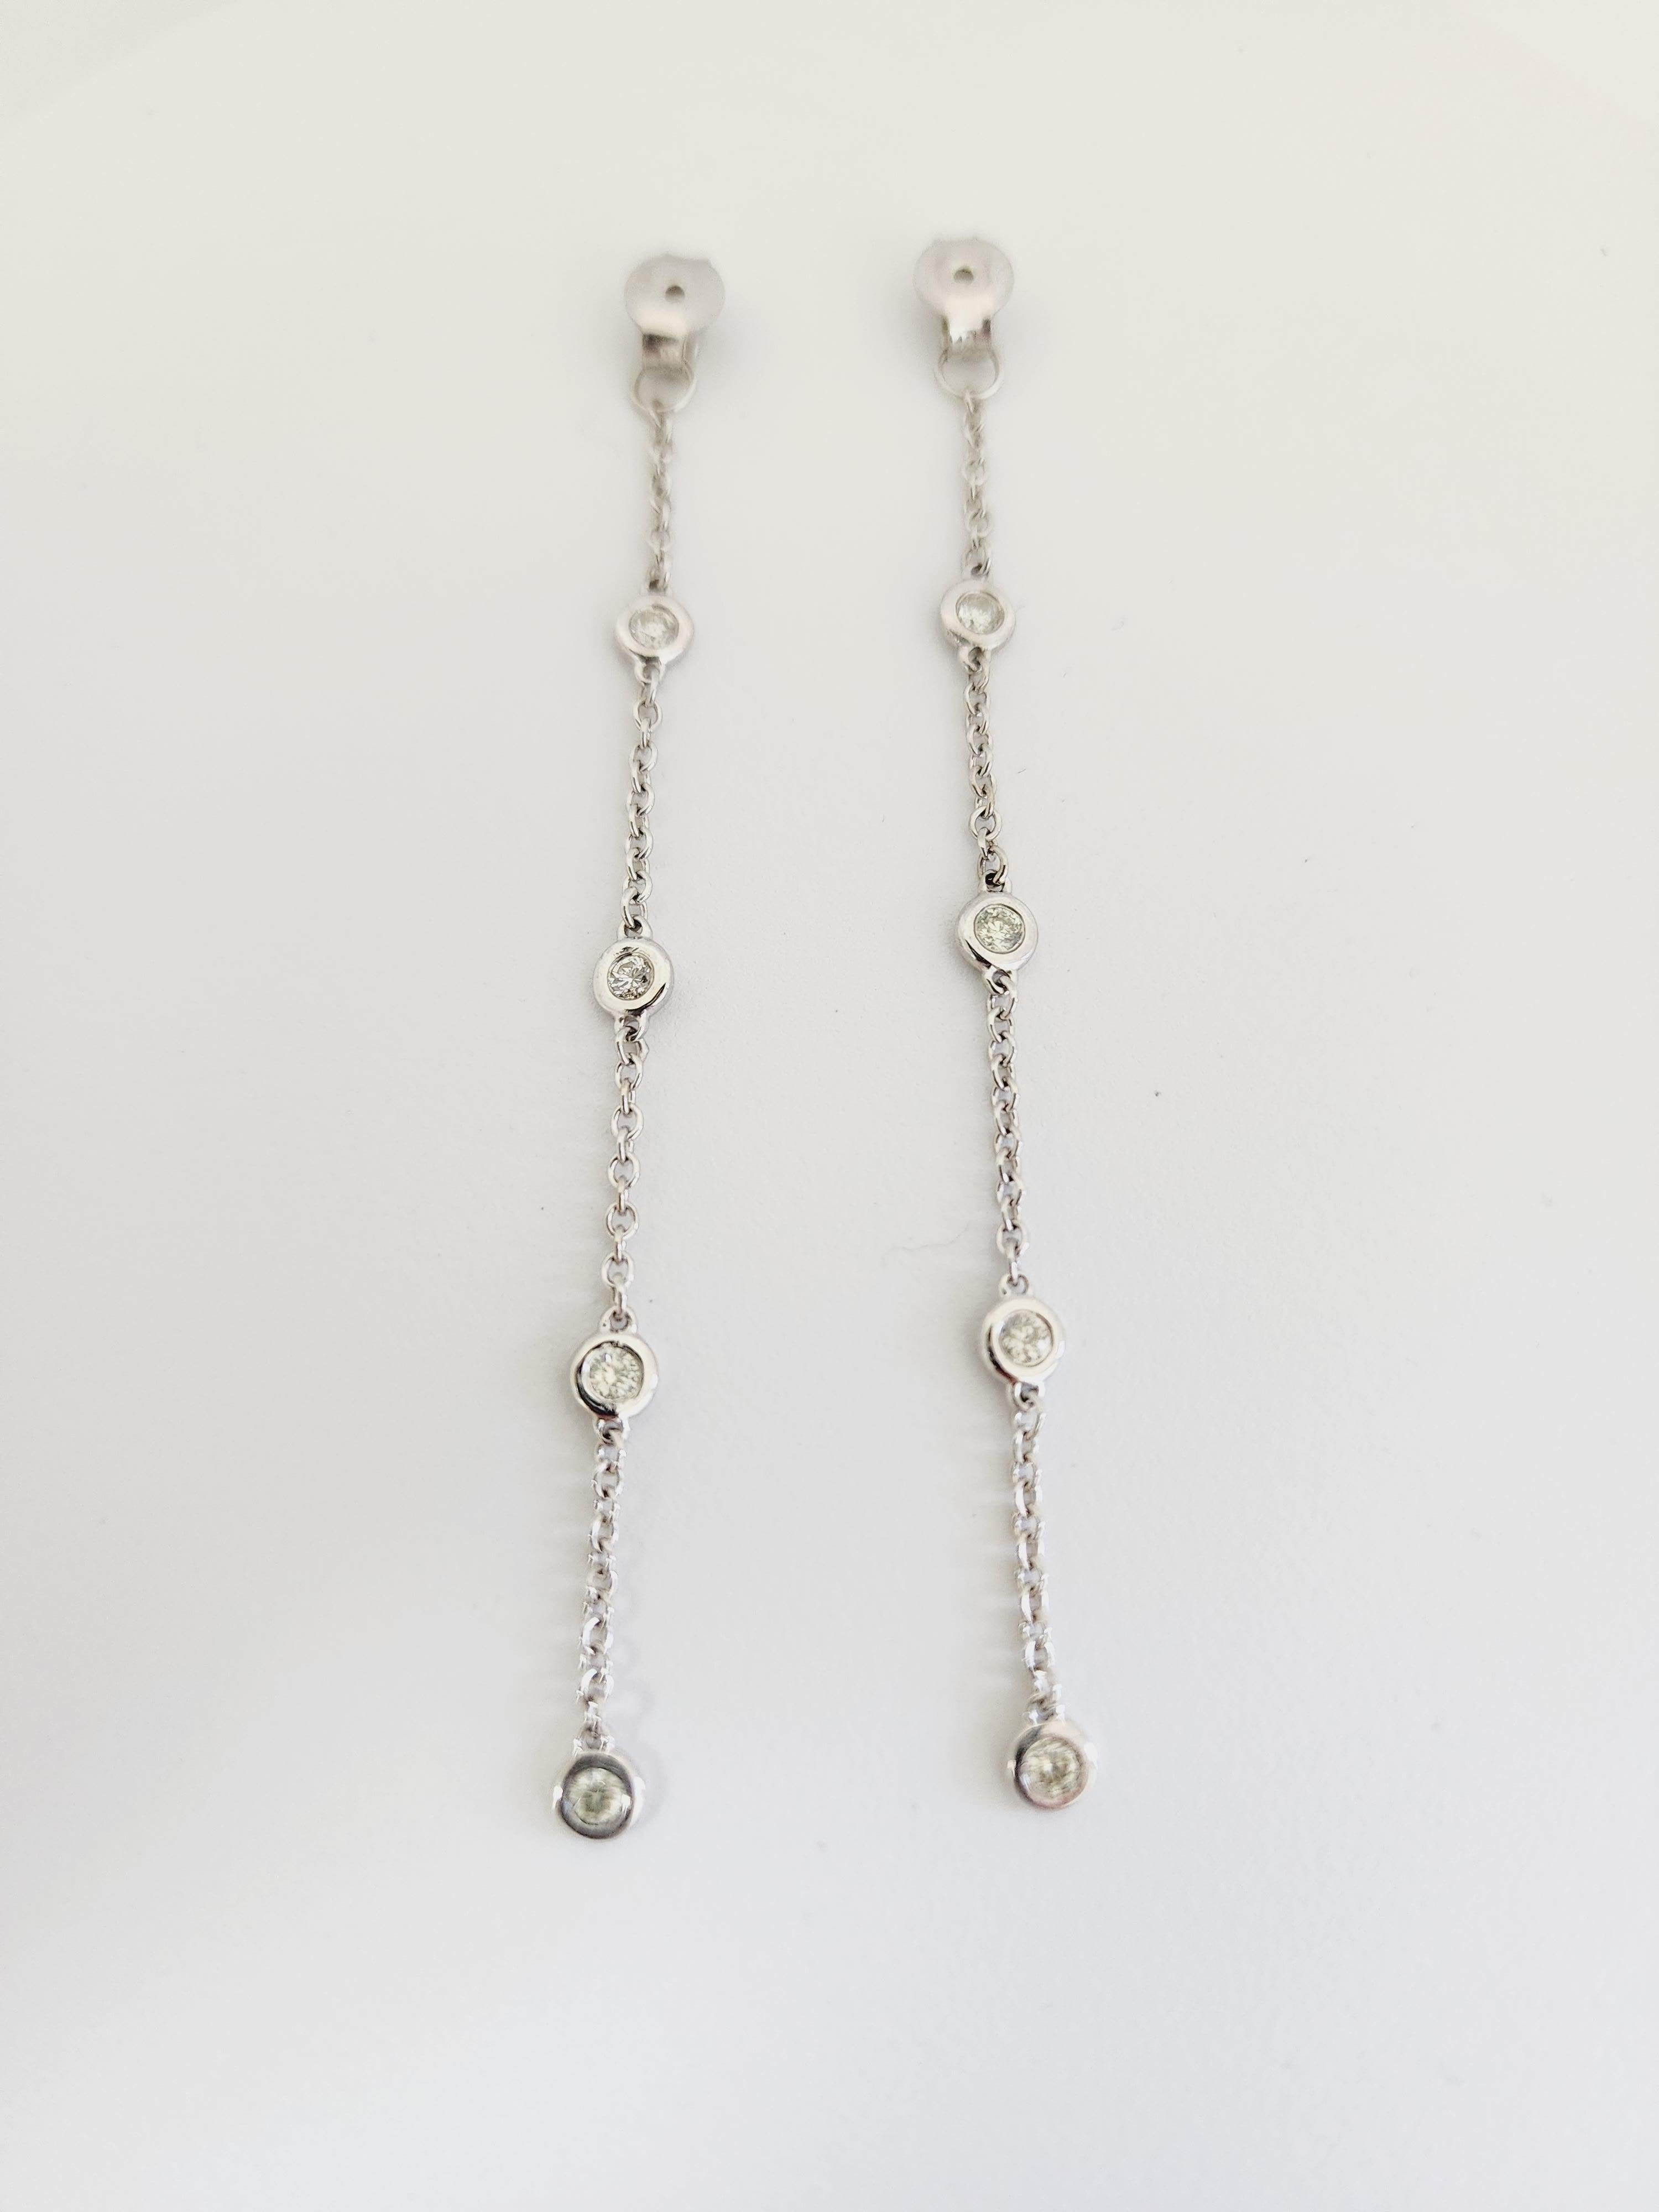 8 Stations Diamond by the yard Studs Jacket set in 14K White gold. The total weight is 0.35 total carats weight. Beautiful shiny stones. The total drop length is 2.50 inch. 4 stations each side, 8 stations total. Easy push back setting. This is use